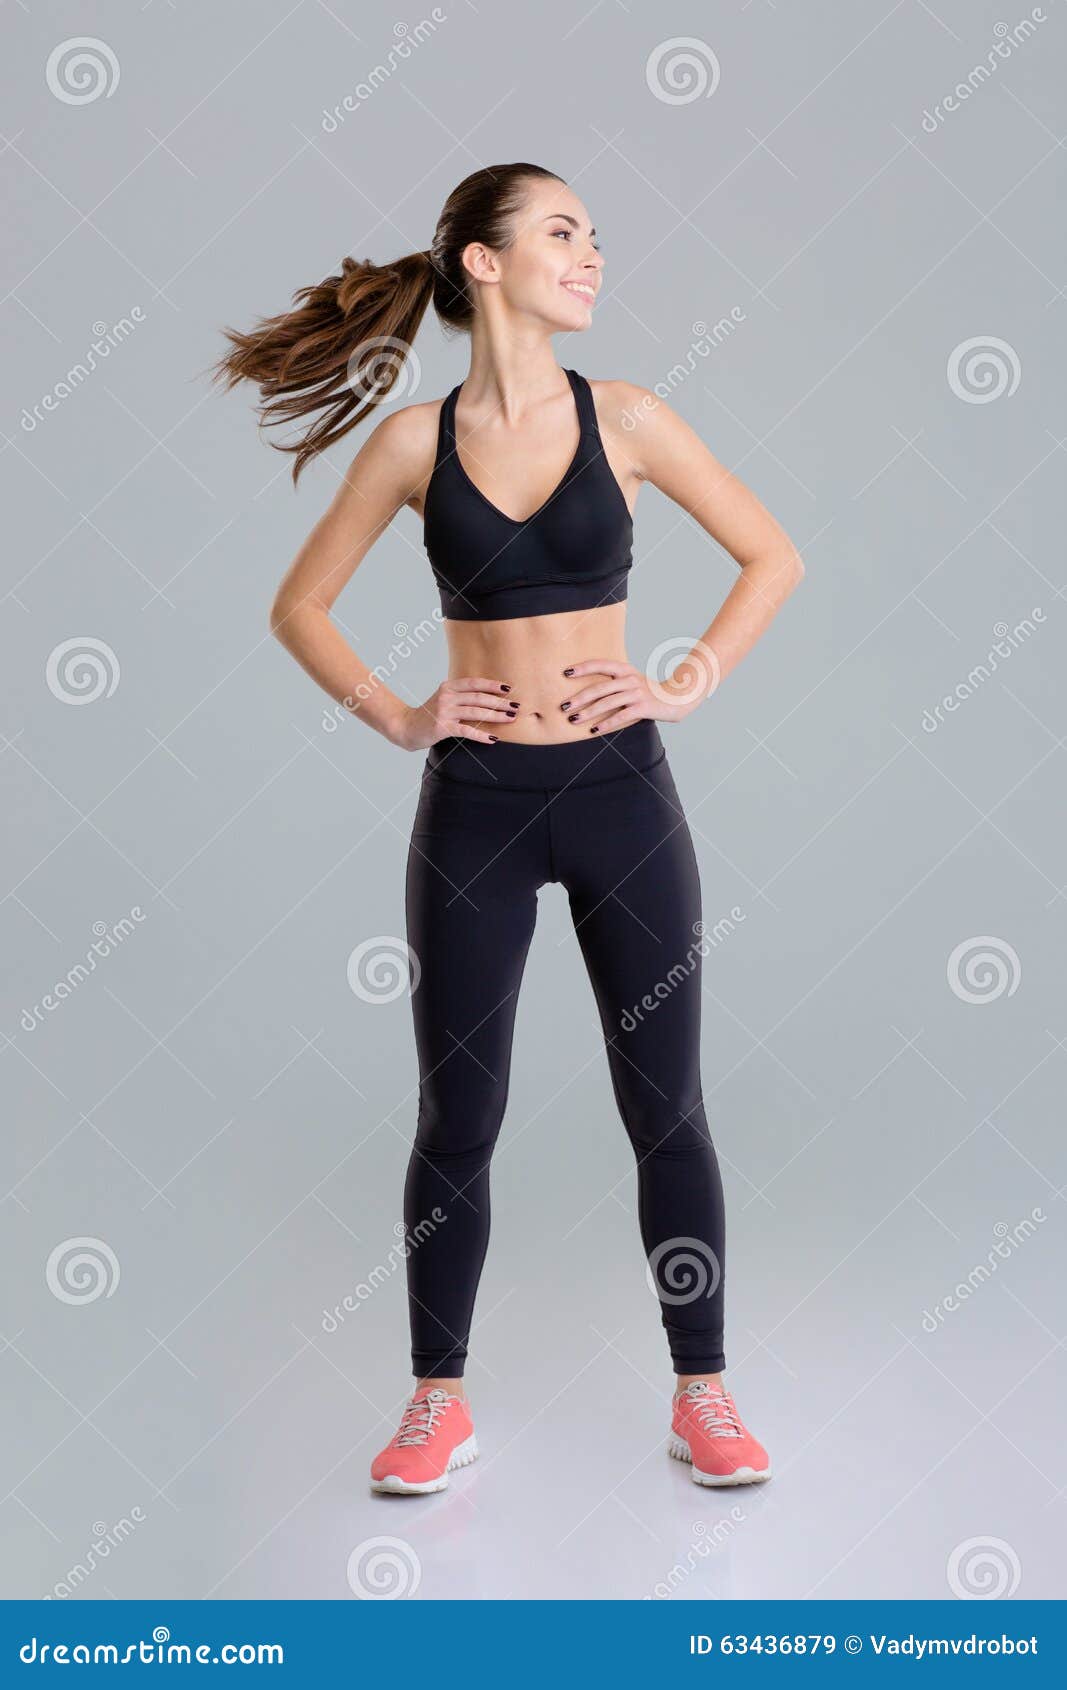 Happy Beautiful Fitness Girl Warming Up Her Neck Stock Image - Image of ...